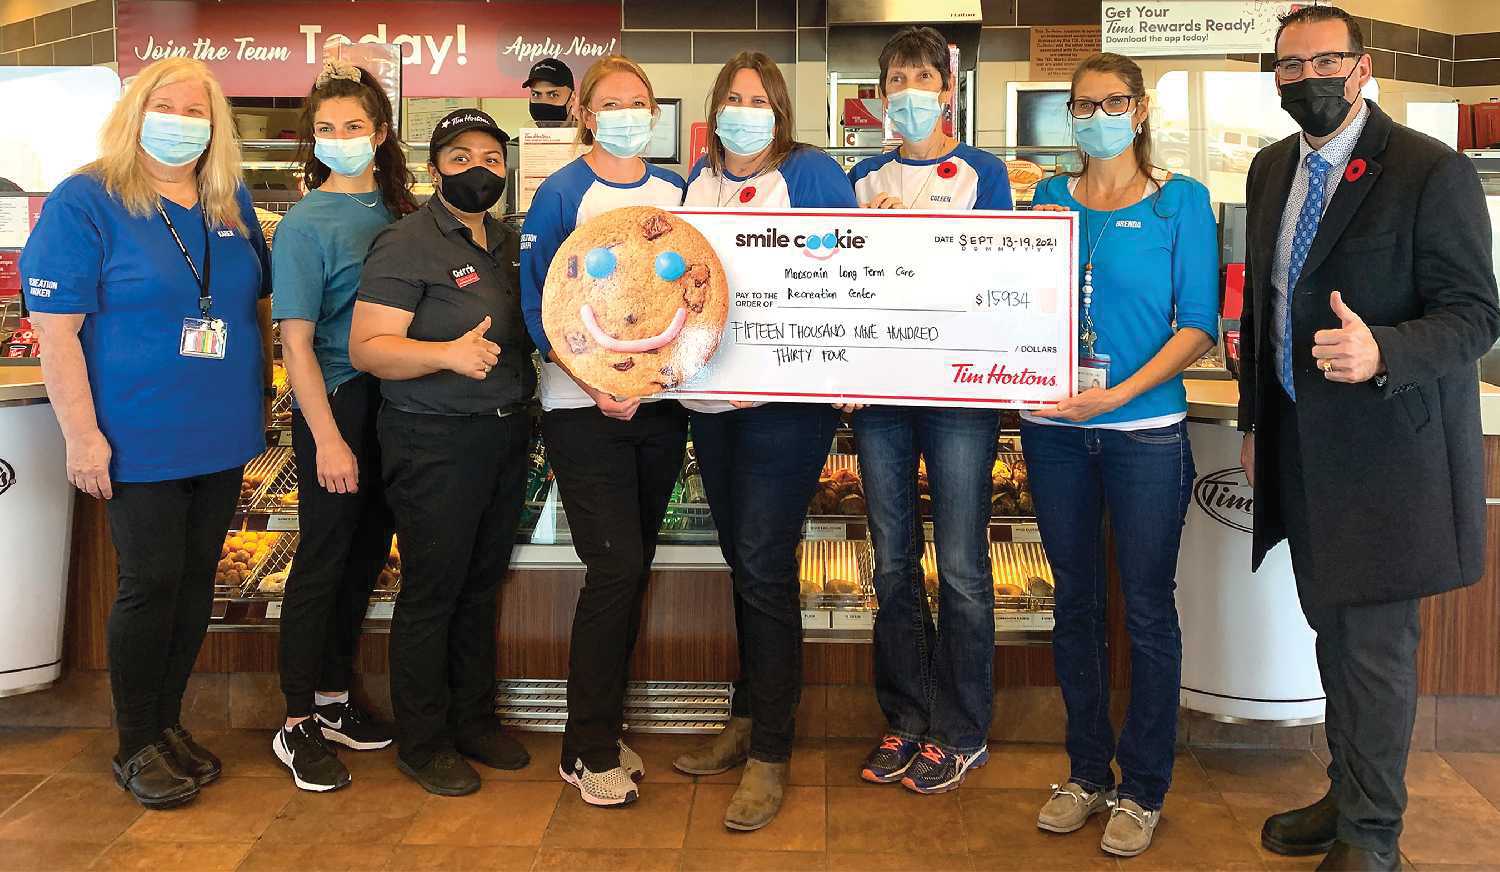 Last year the Tim Hortons Smile Cookie campaign raised close to $16,000 in Moosomin—the second highest total in Saskatchewan. This year proceeds from the Smile Cookie campaign will go to the Southeast Integrated Care Centre equipment fund.